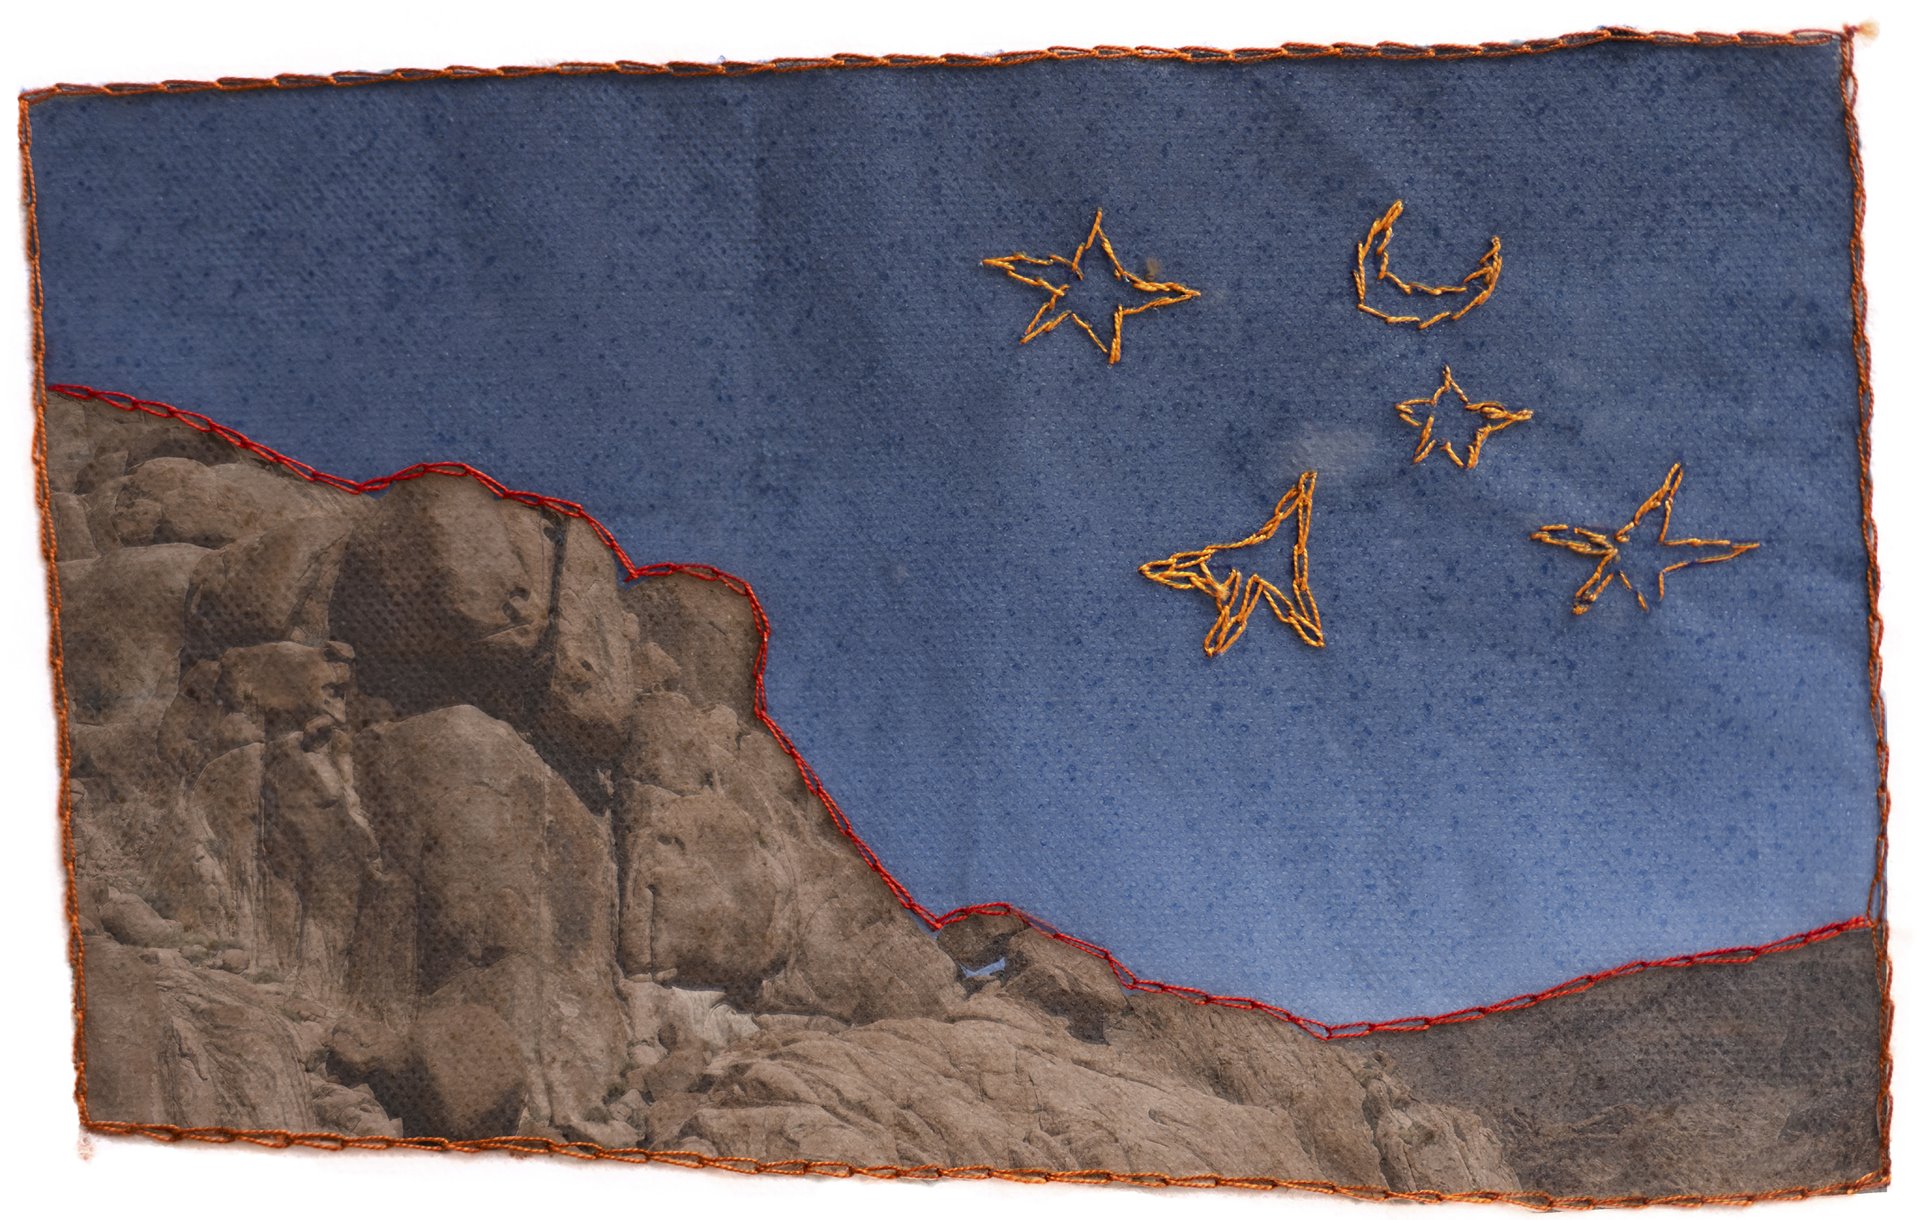 A photograph of Jabal AlBanat (The Mountain of the Girls) embroidered by Yasmine (32), who is from Sheikh Awad village. Legend says that the parents of three Bedouin girls, renowned for their long and luscious hair, forcefully arranged marriages for them on the same night. Feeling forced to wed, the three girls decided to go up to a nearby mountain and bonded by their long and strong braids, they leaped off the summit. The mountain has been named after them as a reminder of women&rsquo;s right to choose.